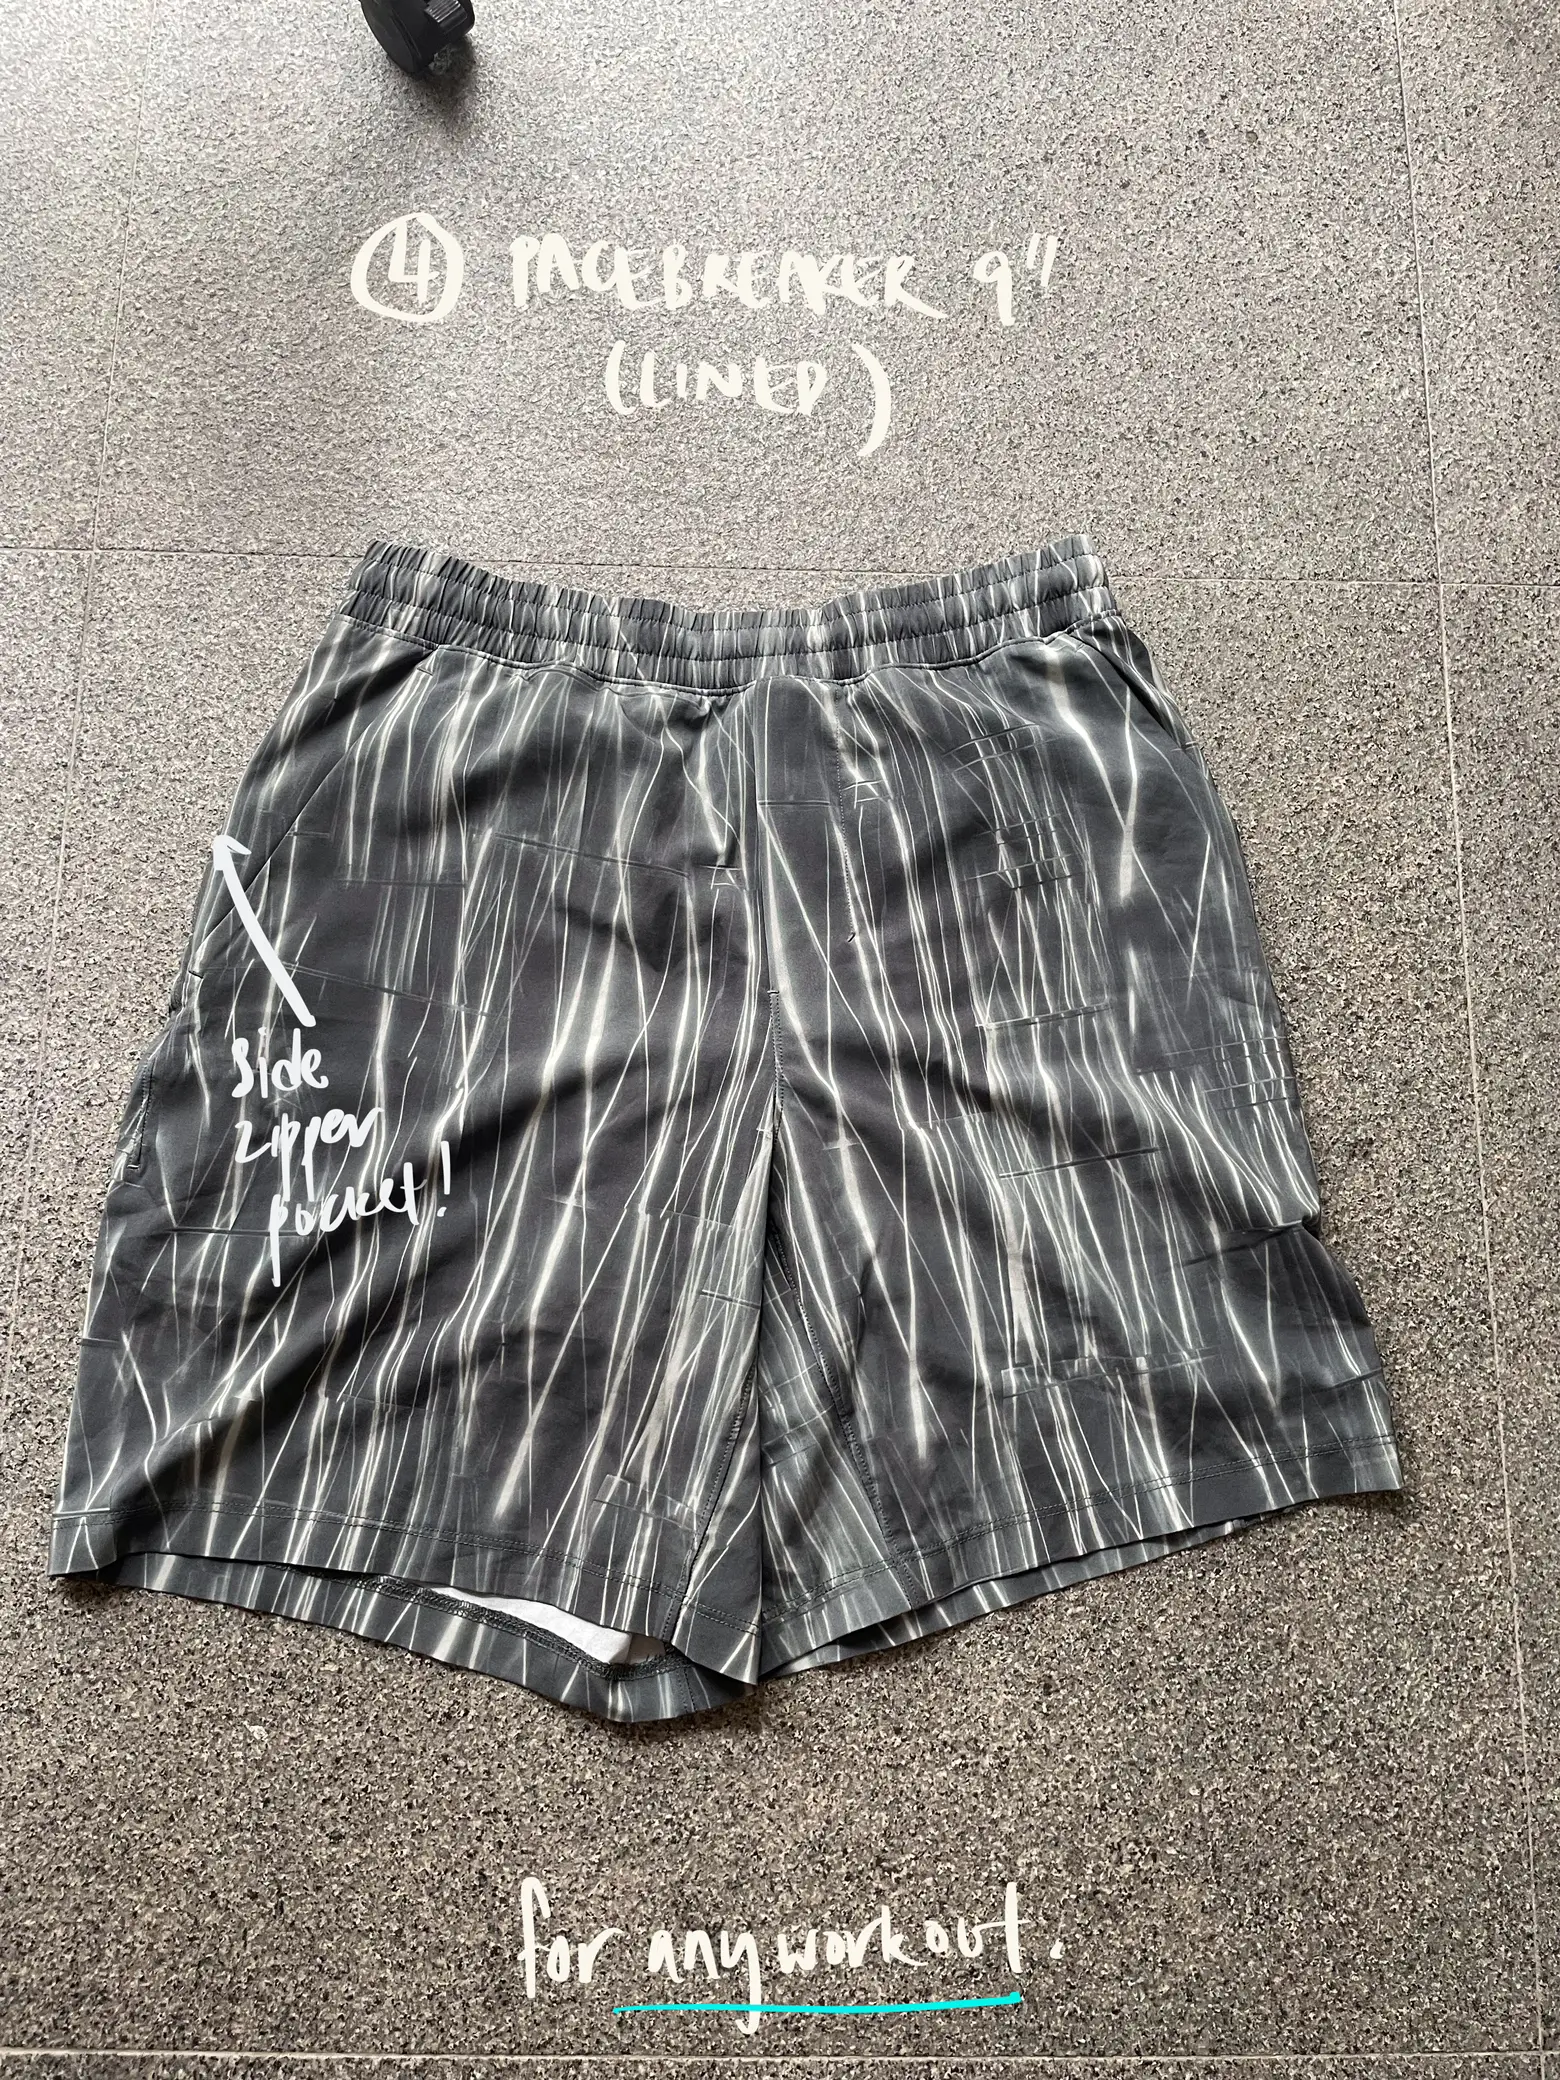 STOCK UP ON THESE LULULEMON MENS SHORTS 🥵, Gallery posted by Ethan Chan